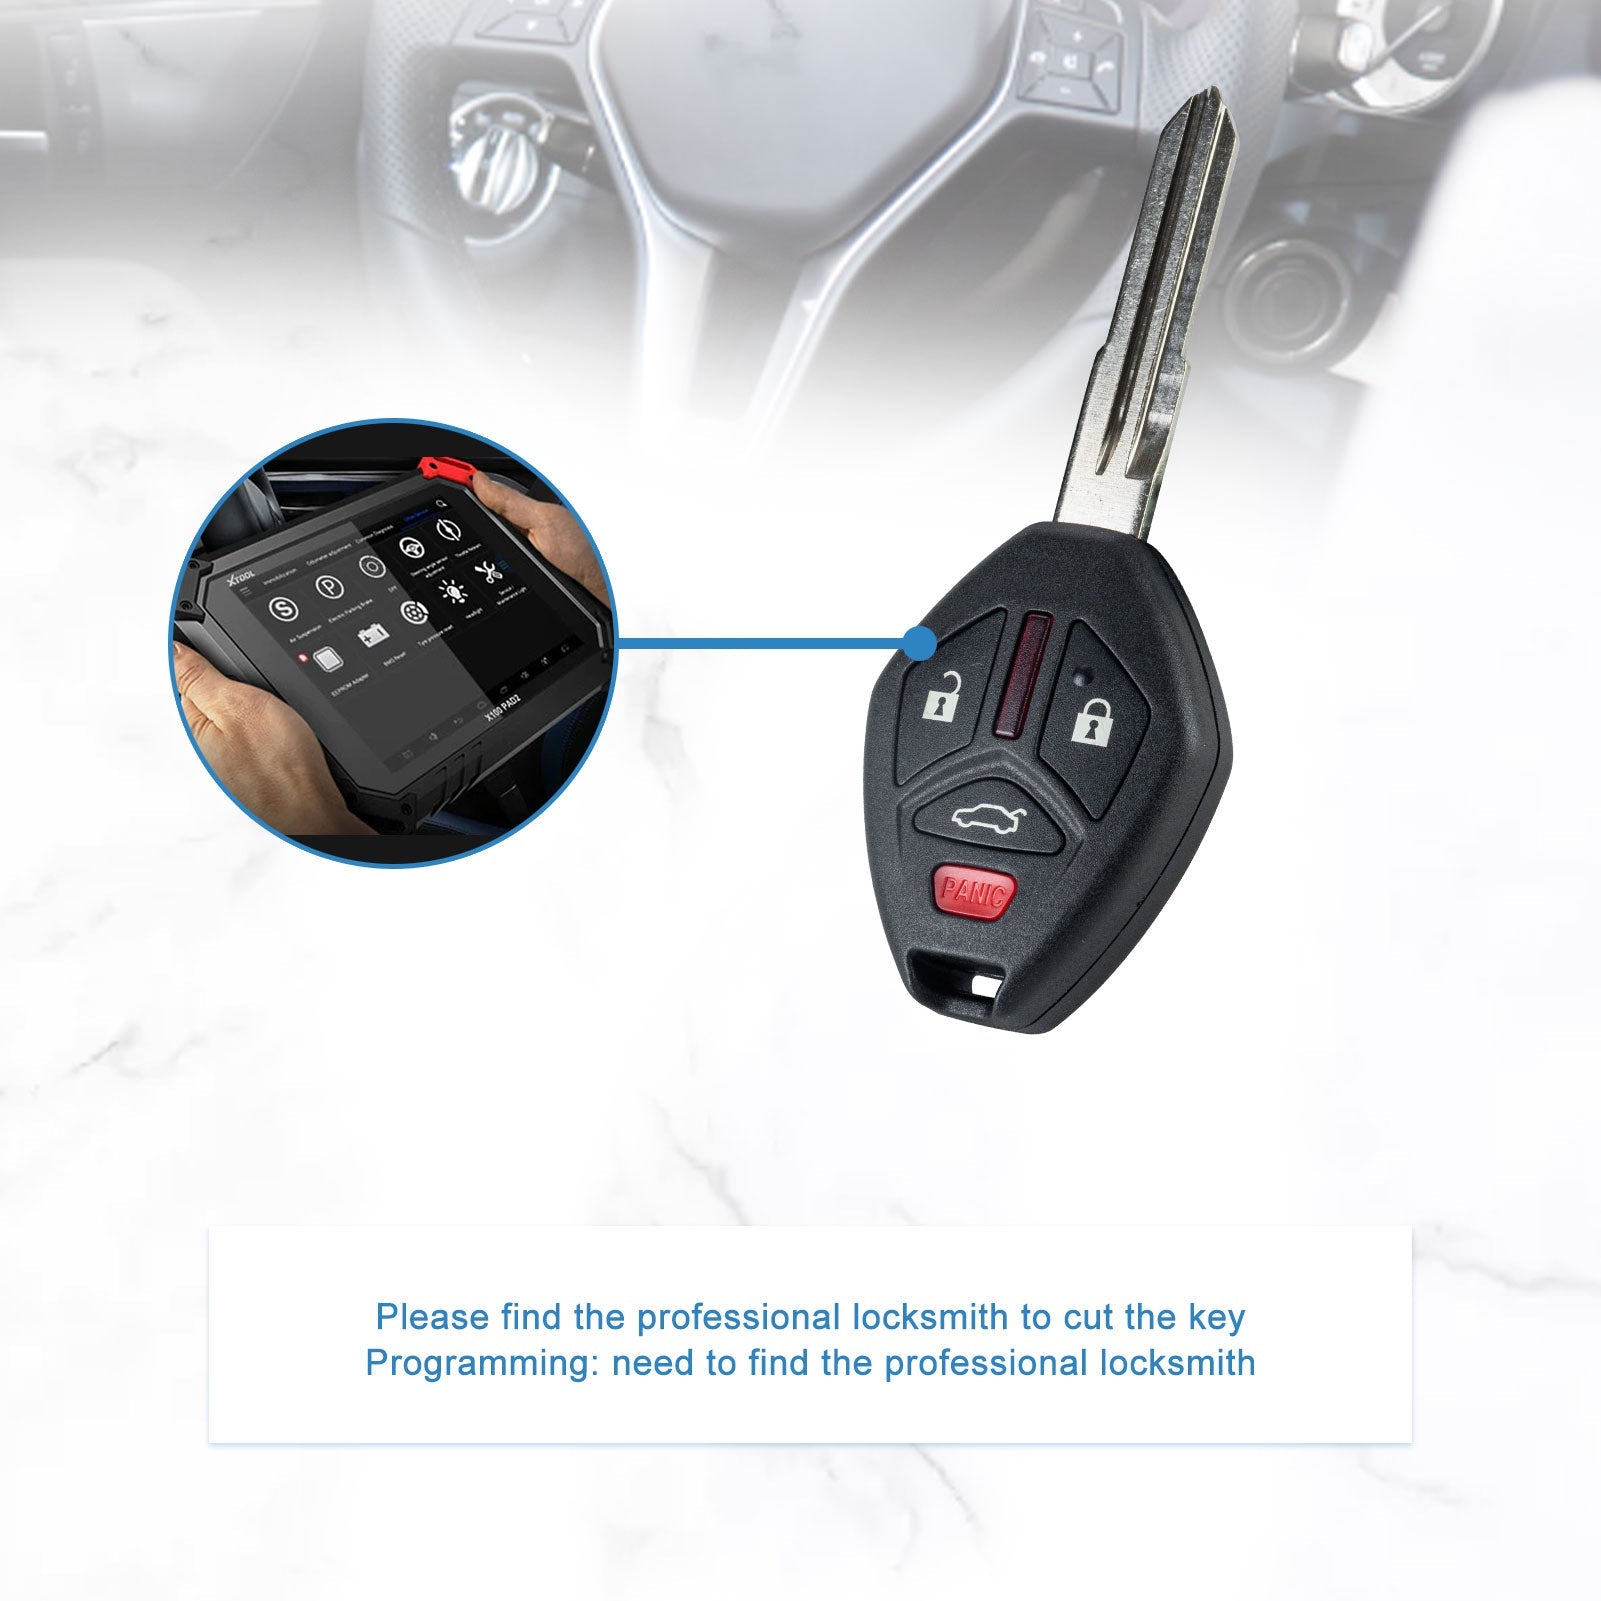 315MHz Car Key Fob Keyless Entry Control Replacement for 2007-2018 Mitsubishi Lancer OUCG8D-625M-A  KR-M4SD-05